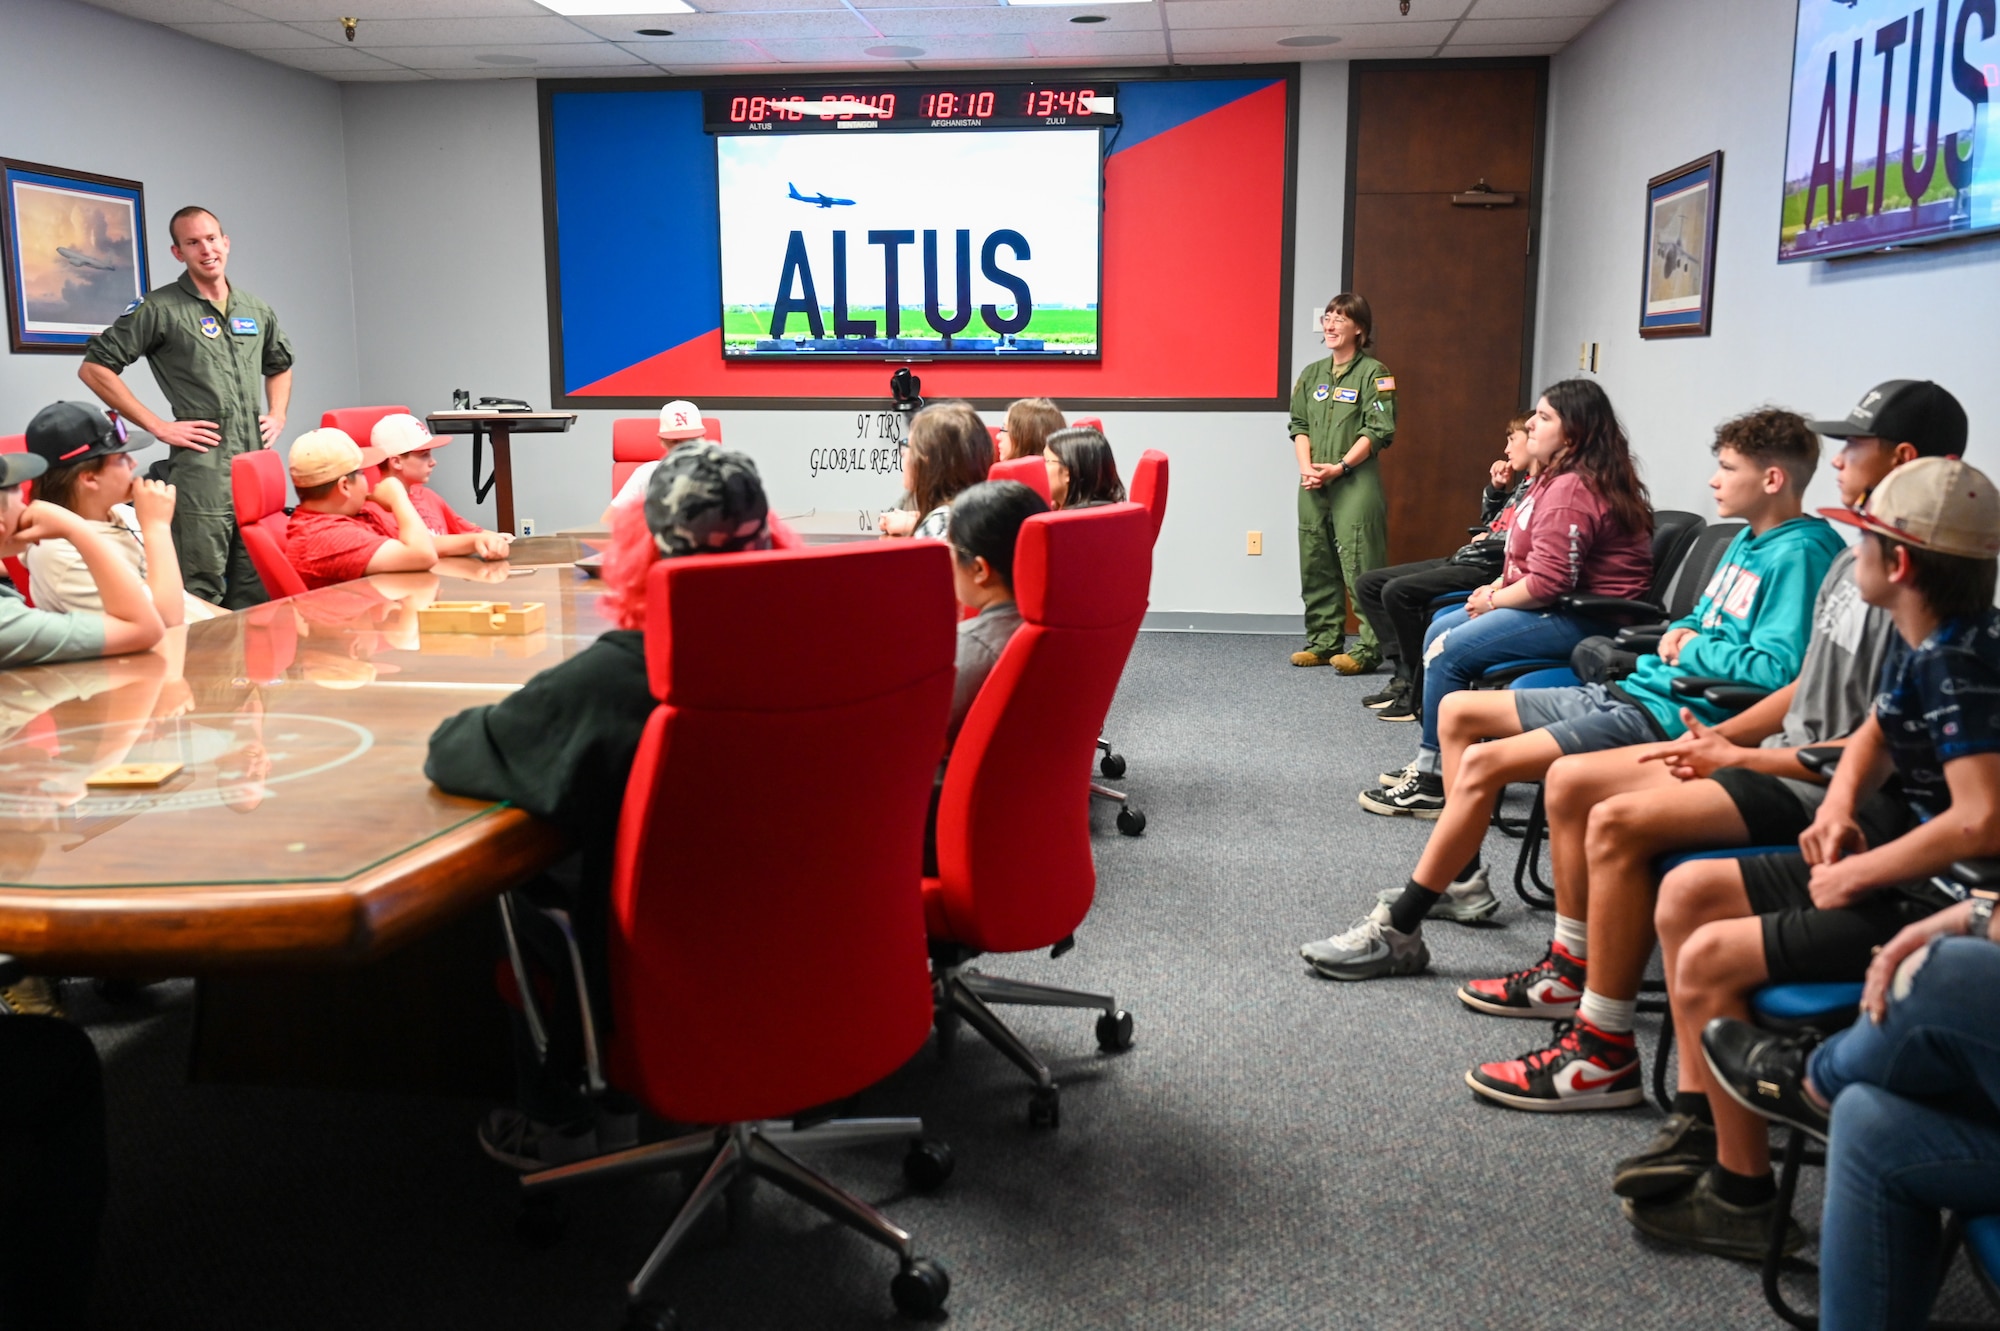 U.S. Air Force Tech. Sgt. Travis Peirce (left), 56th Air Refueling Squadron tactics flight chief, talks with students from Navajo Public Schools to kick off the Aviation Inspiration and Mentorship Wing tour at Altus Air Force Base, Oklahoma, May 10, 2023. Twenty-three students attended the event, which highlighted science, technology, engineering, math and aviation. (U.S. Air Force photo by Airman 1st Class Heidi Bucins)